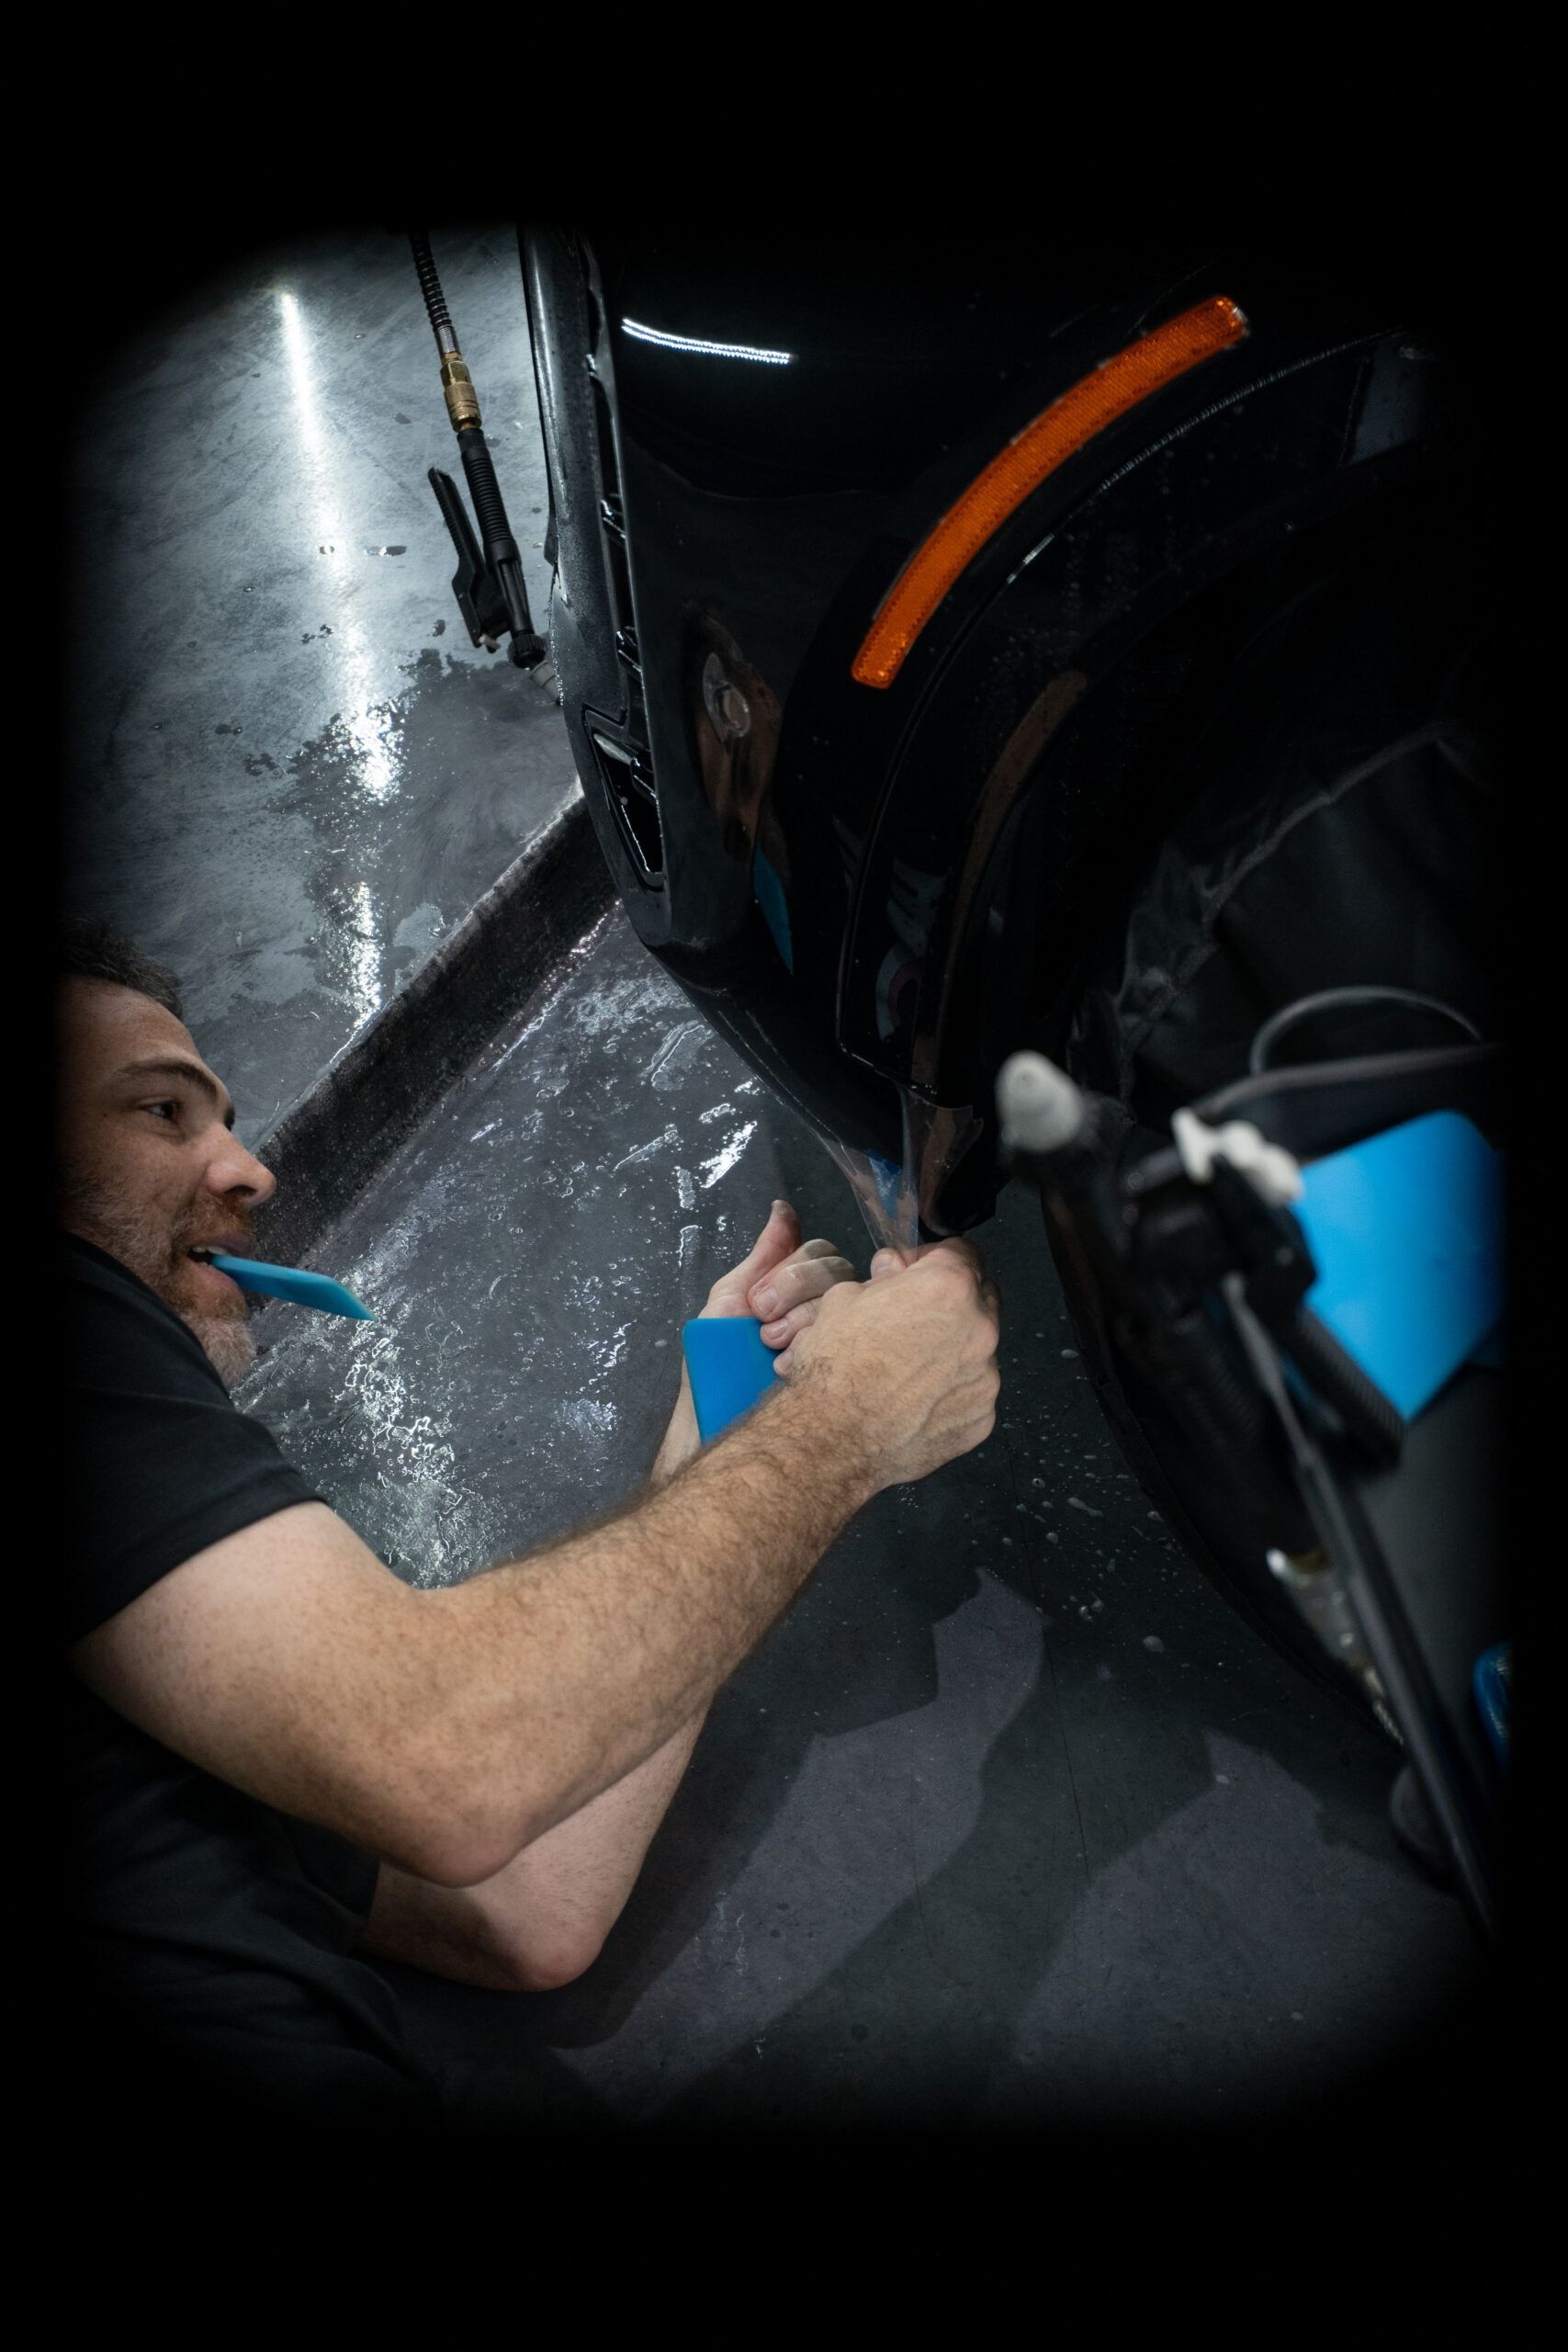 A man is cleaning a car with a brush.